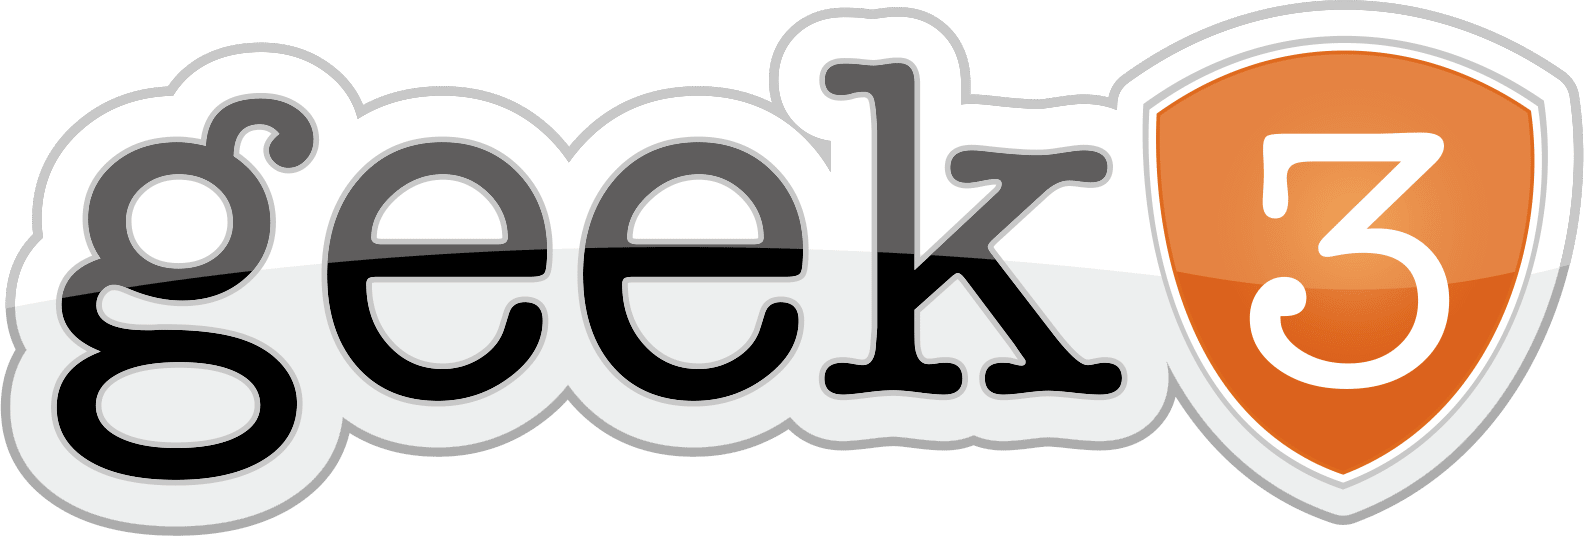 Geek³ IT Support Services